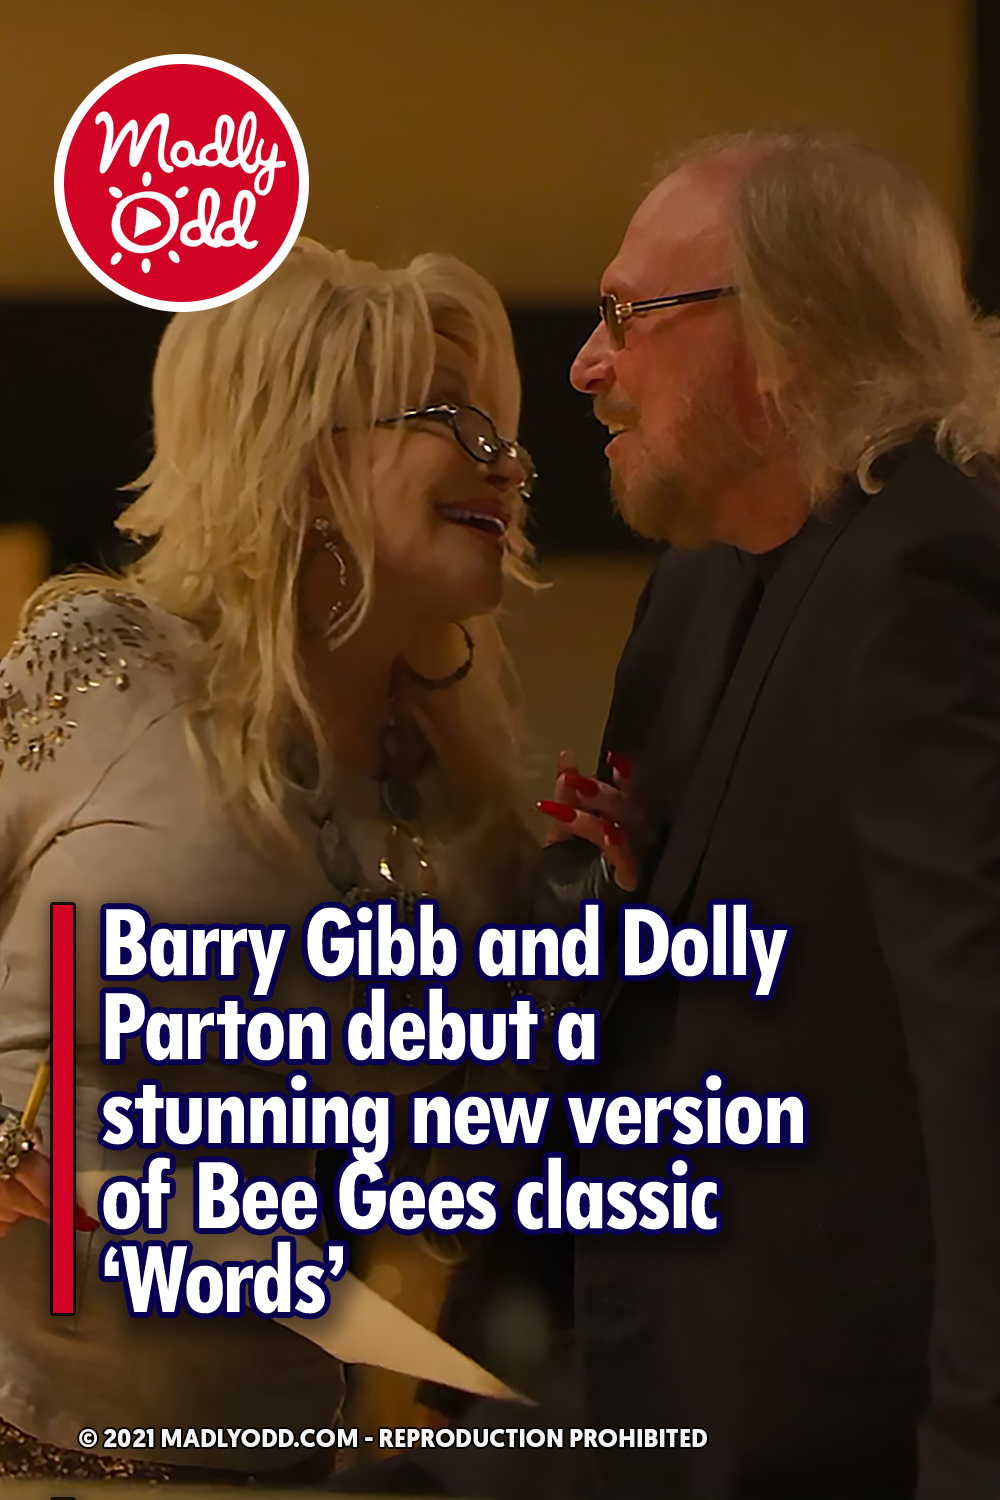 Barry Gibb and Dolly Parton debut a stunning new version of Bee Gees classic ‘Words’